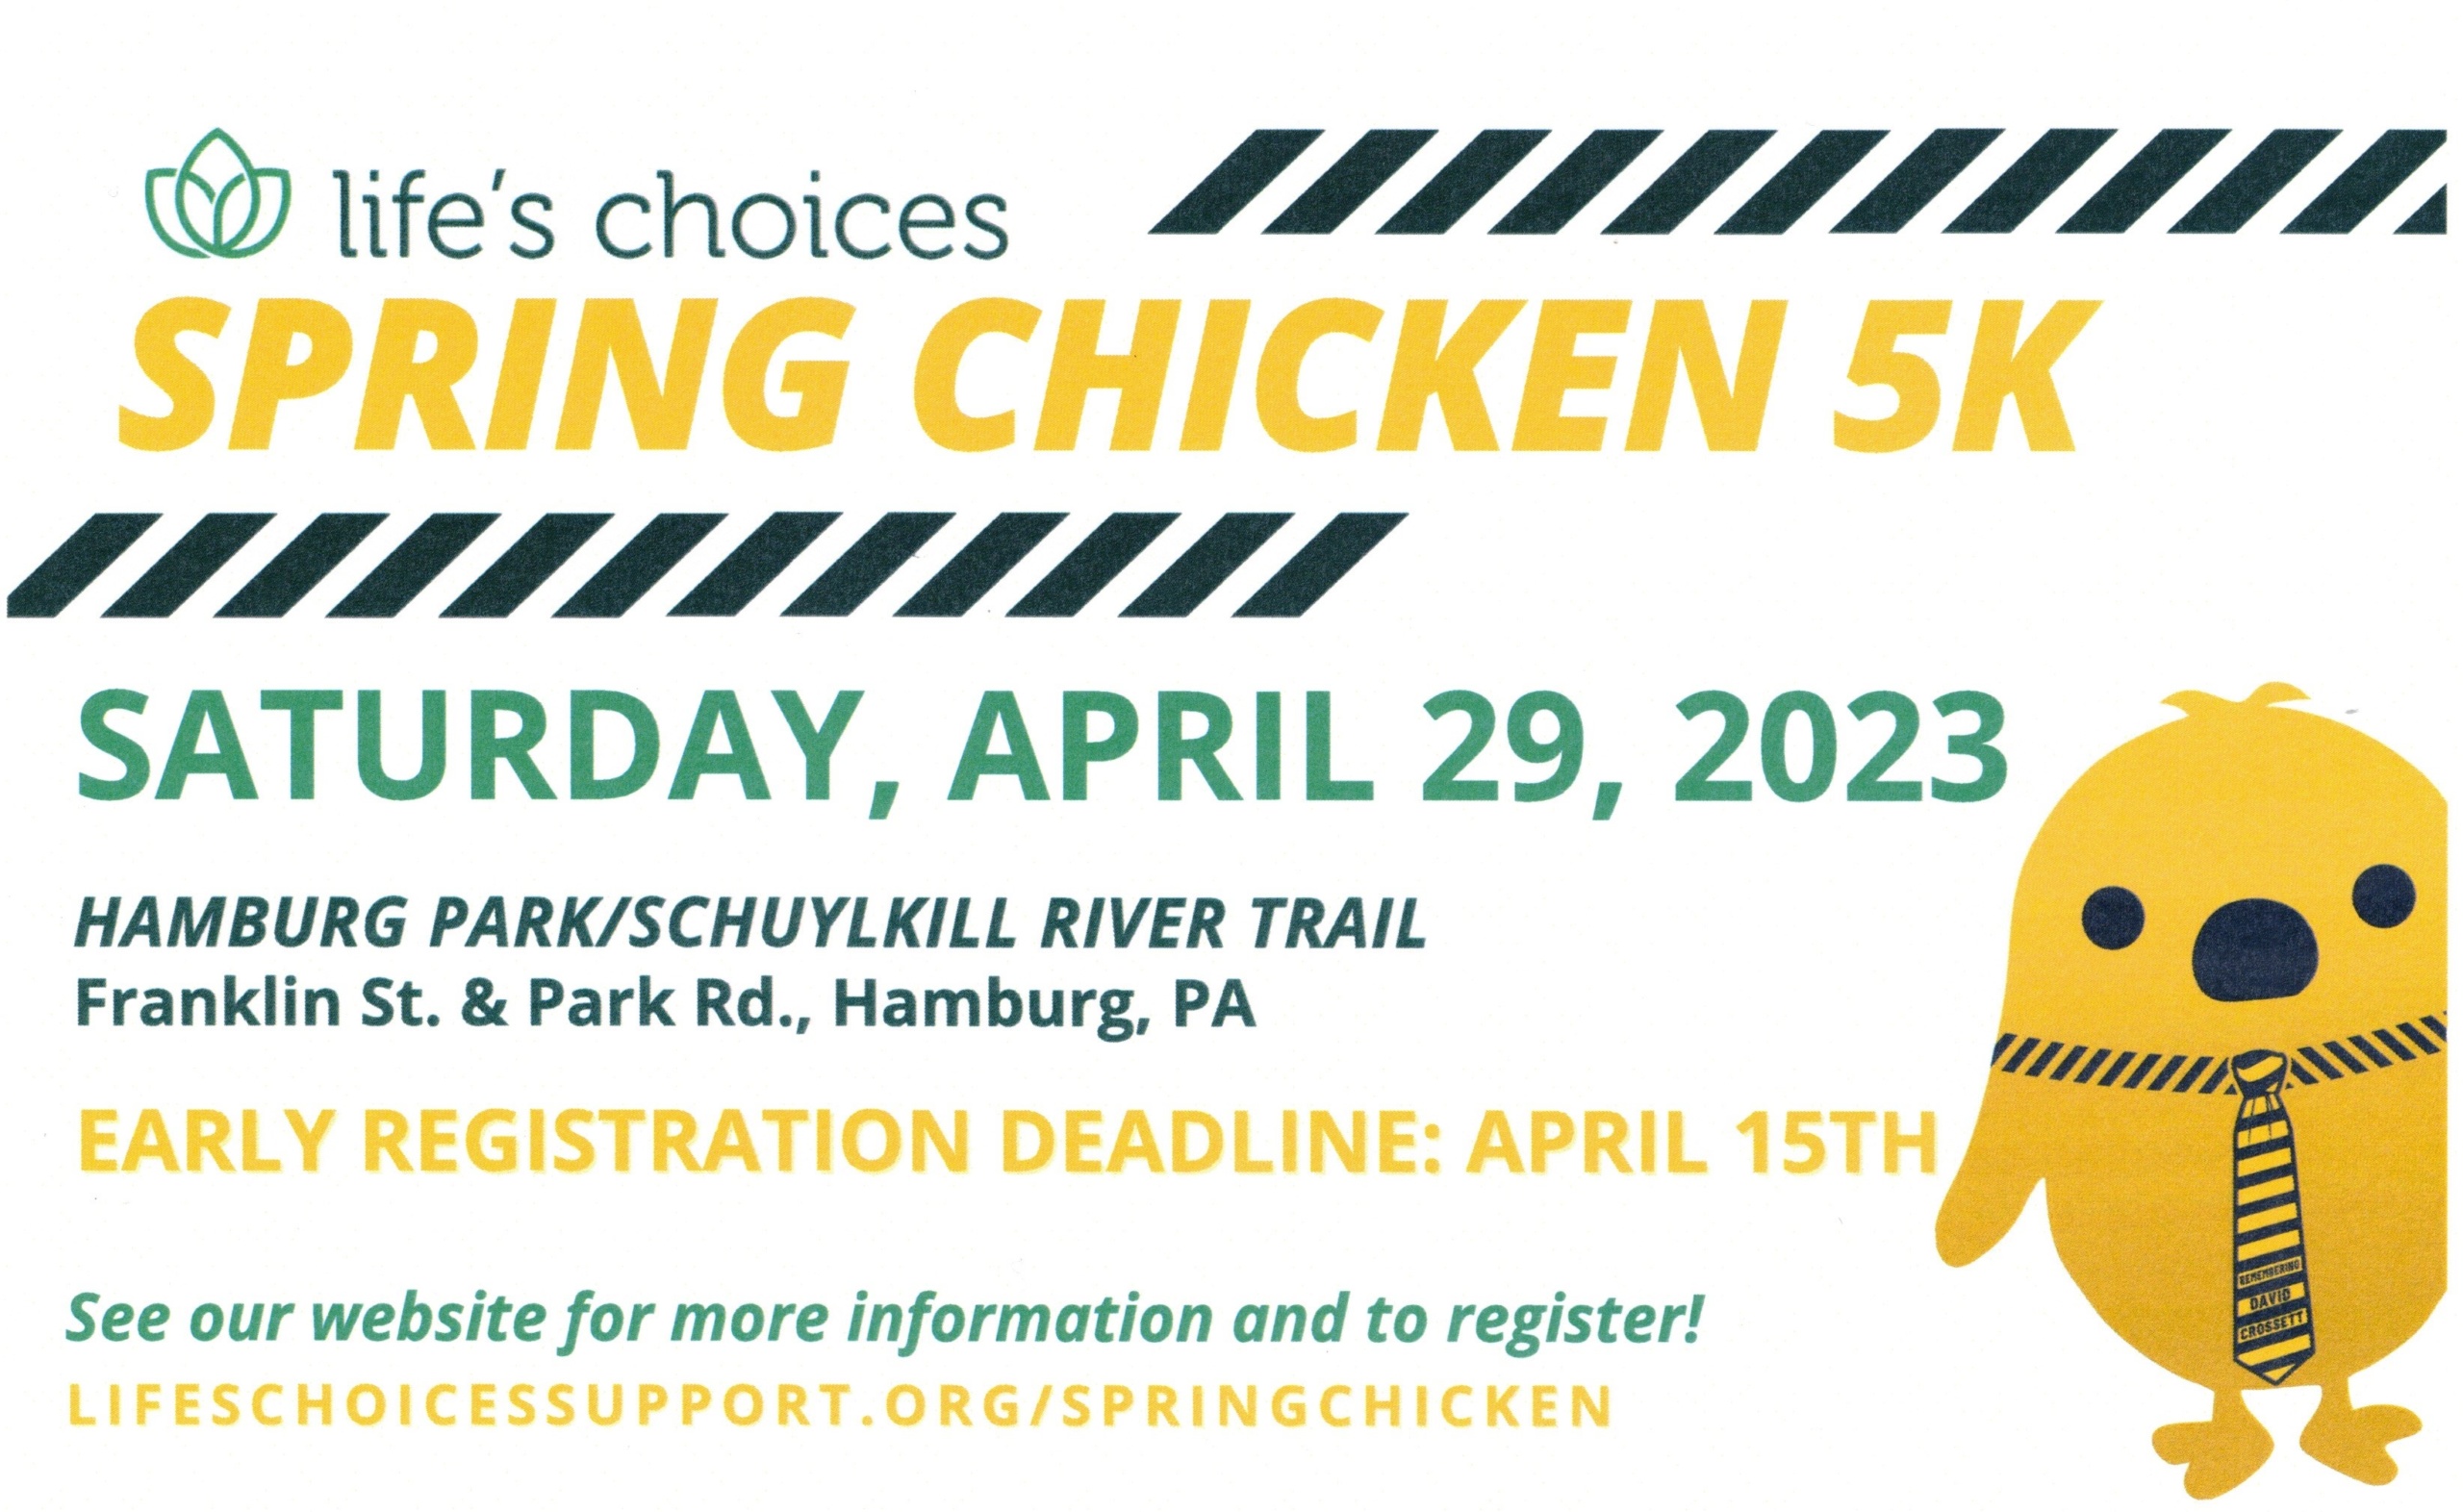 Life's Choices Annual Fundraiser: Spring Chicken 5K, Saturday April 29.